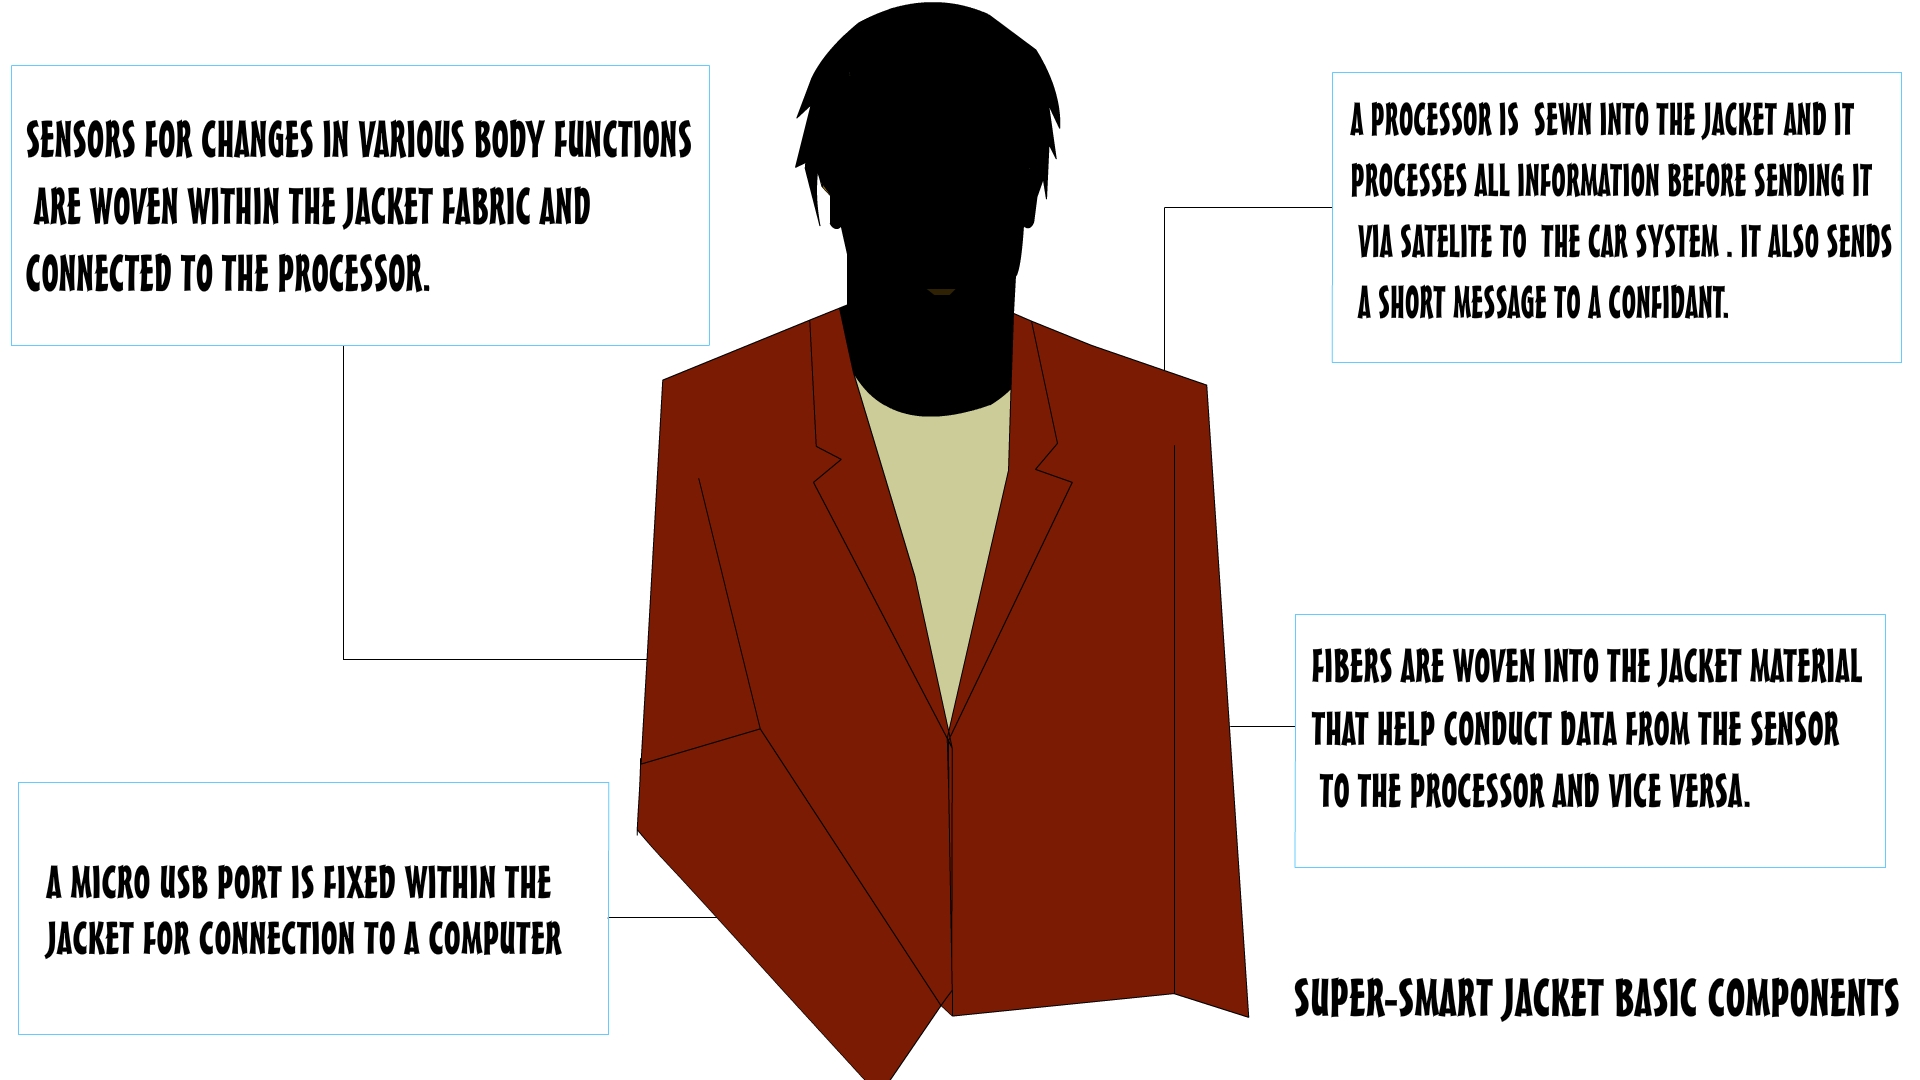 The Super Smart Jacket is a wearable computing deivice that resembles an average casual jacket